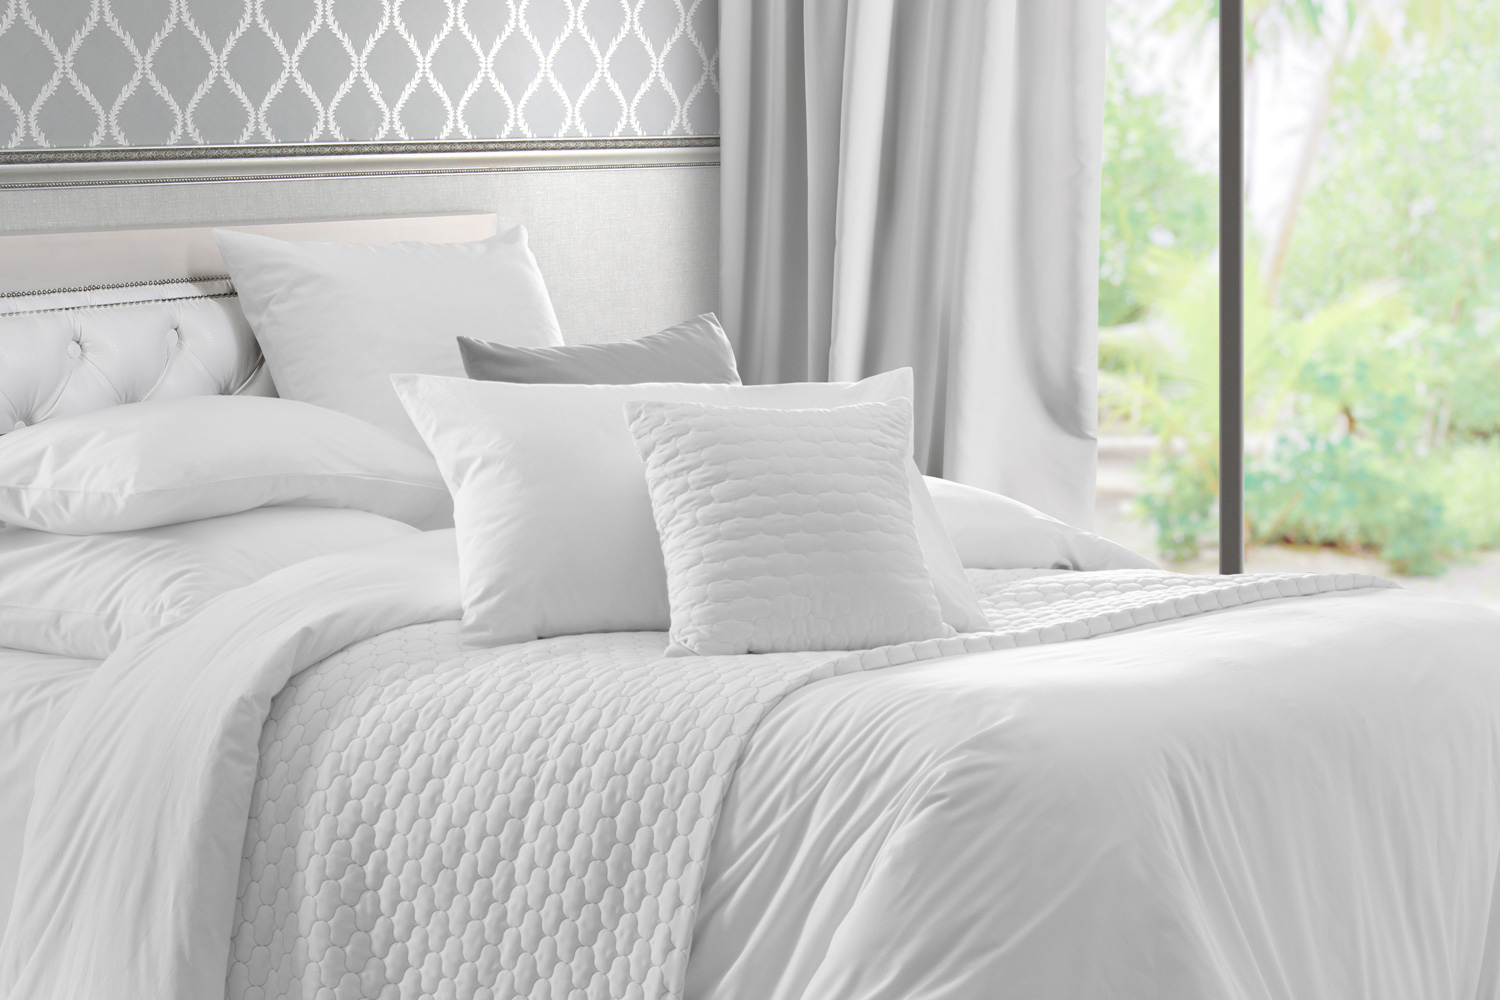 King bed with white linens and pillows